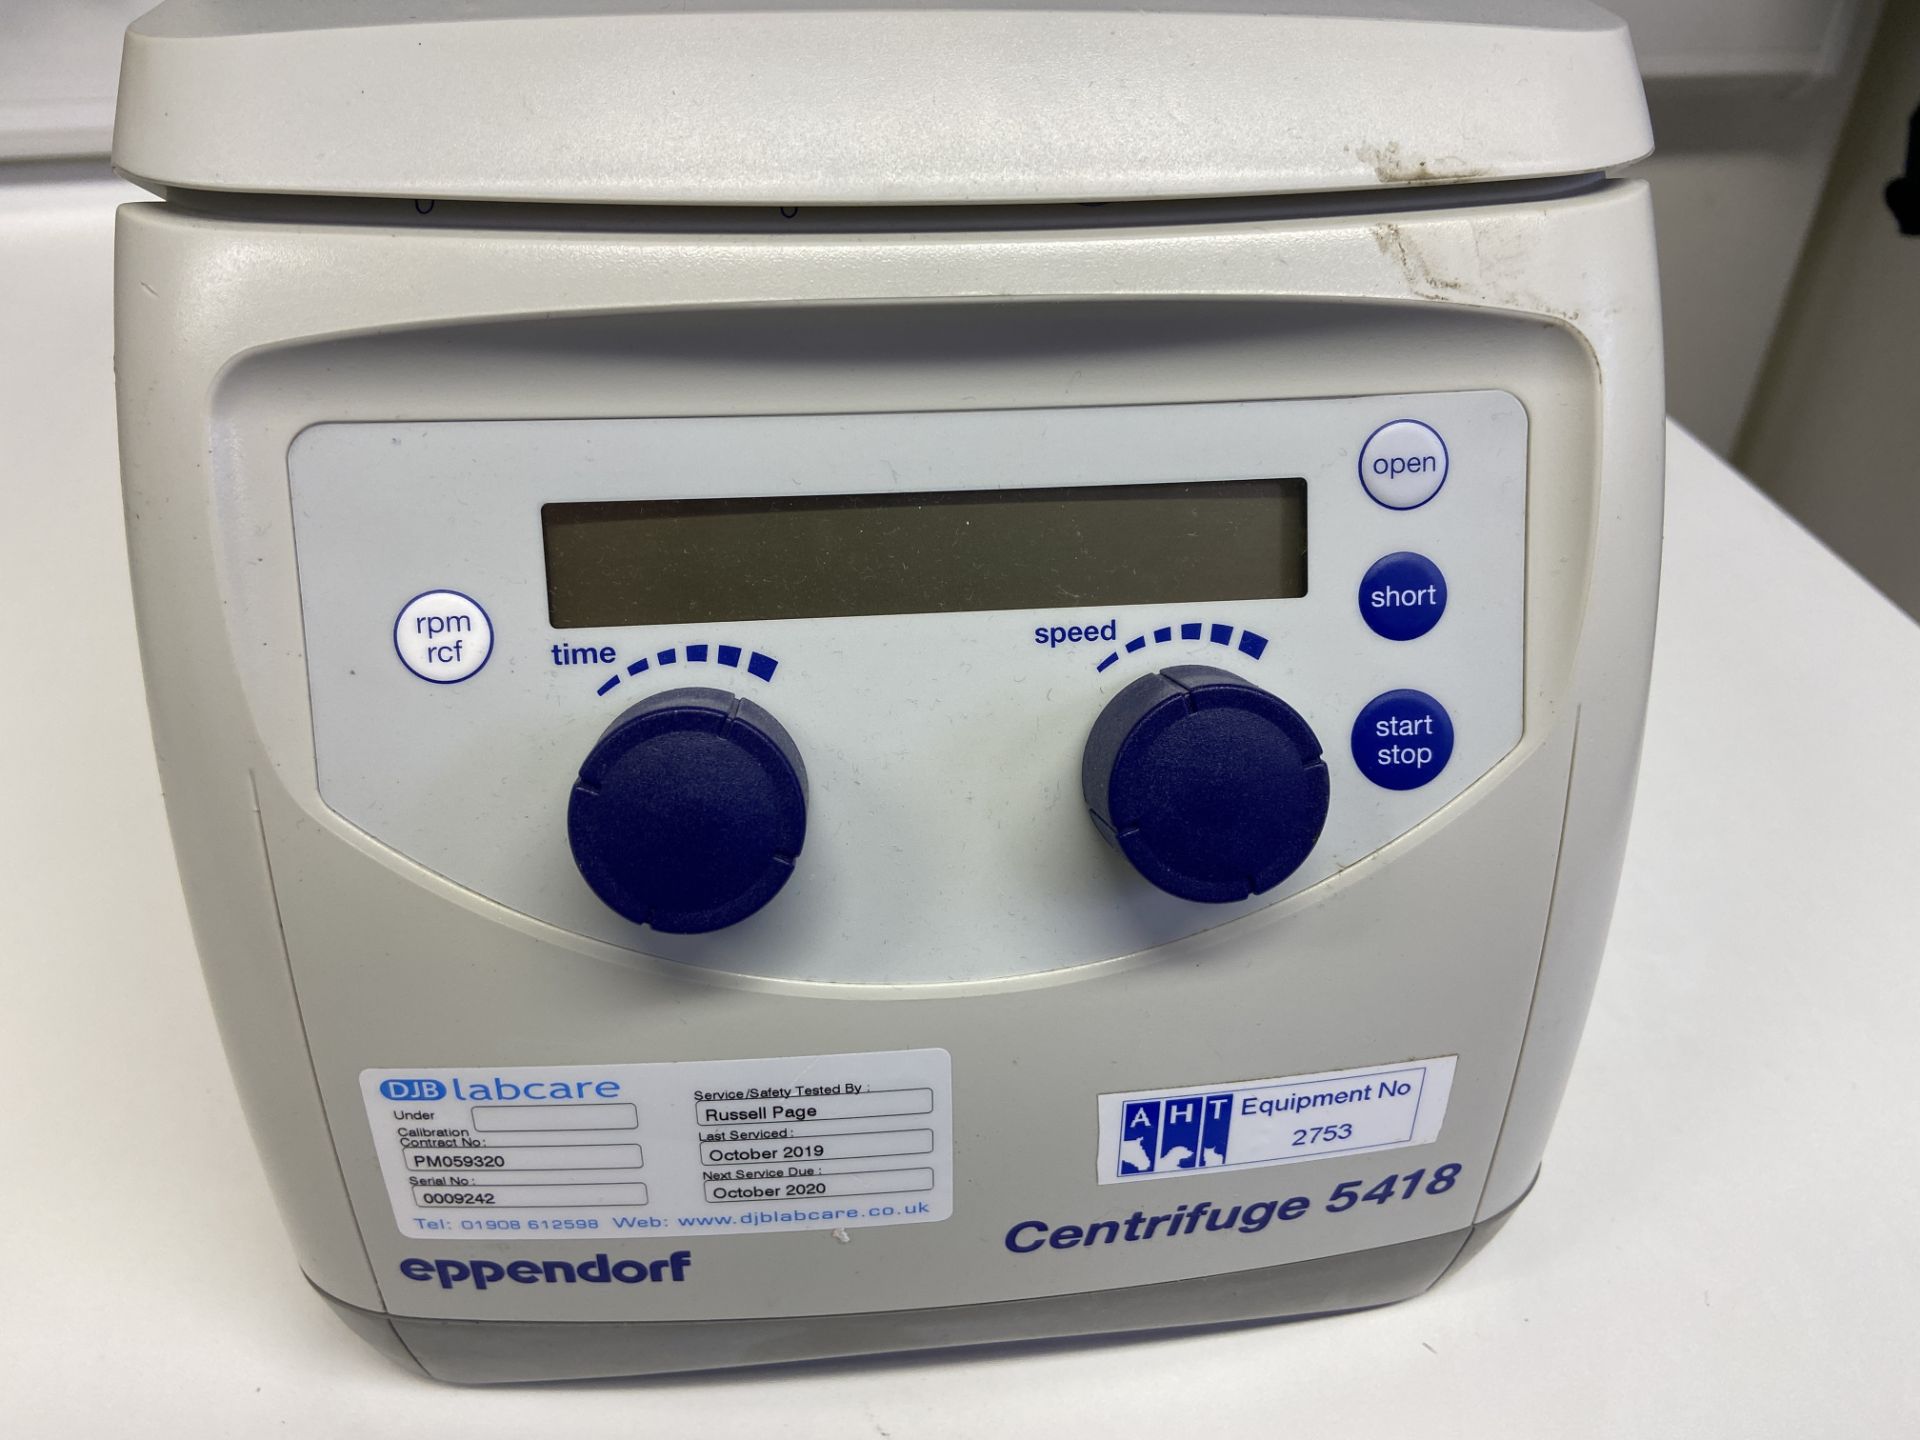 Eppendorf Scientific 5418 benchtop centrifuge, Serial No. 0009242 (2007) with 240v power cable - Image 2 of 2